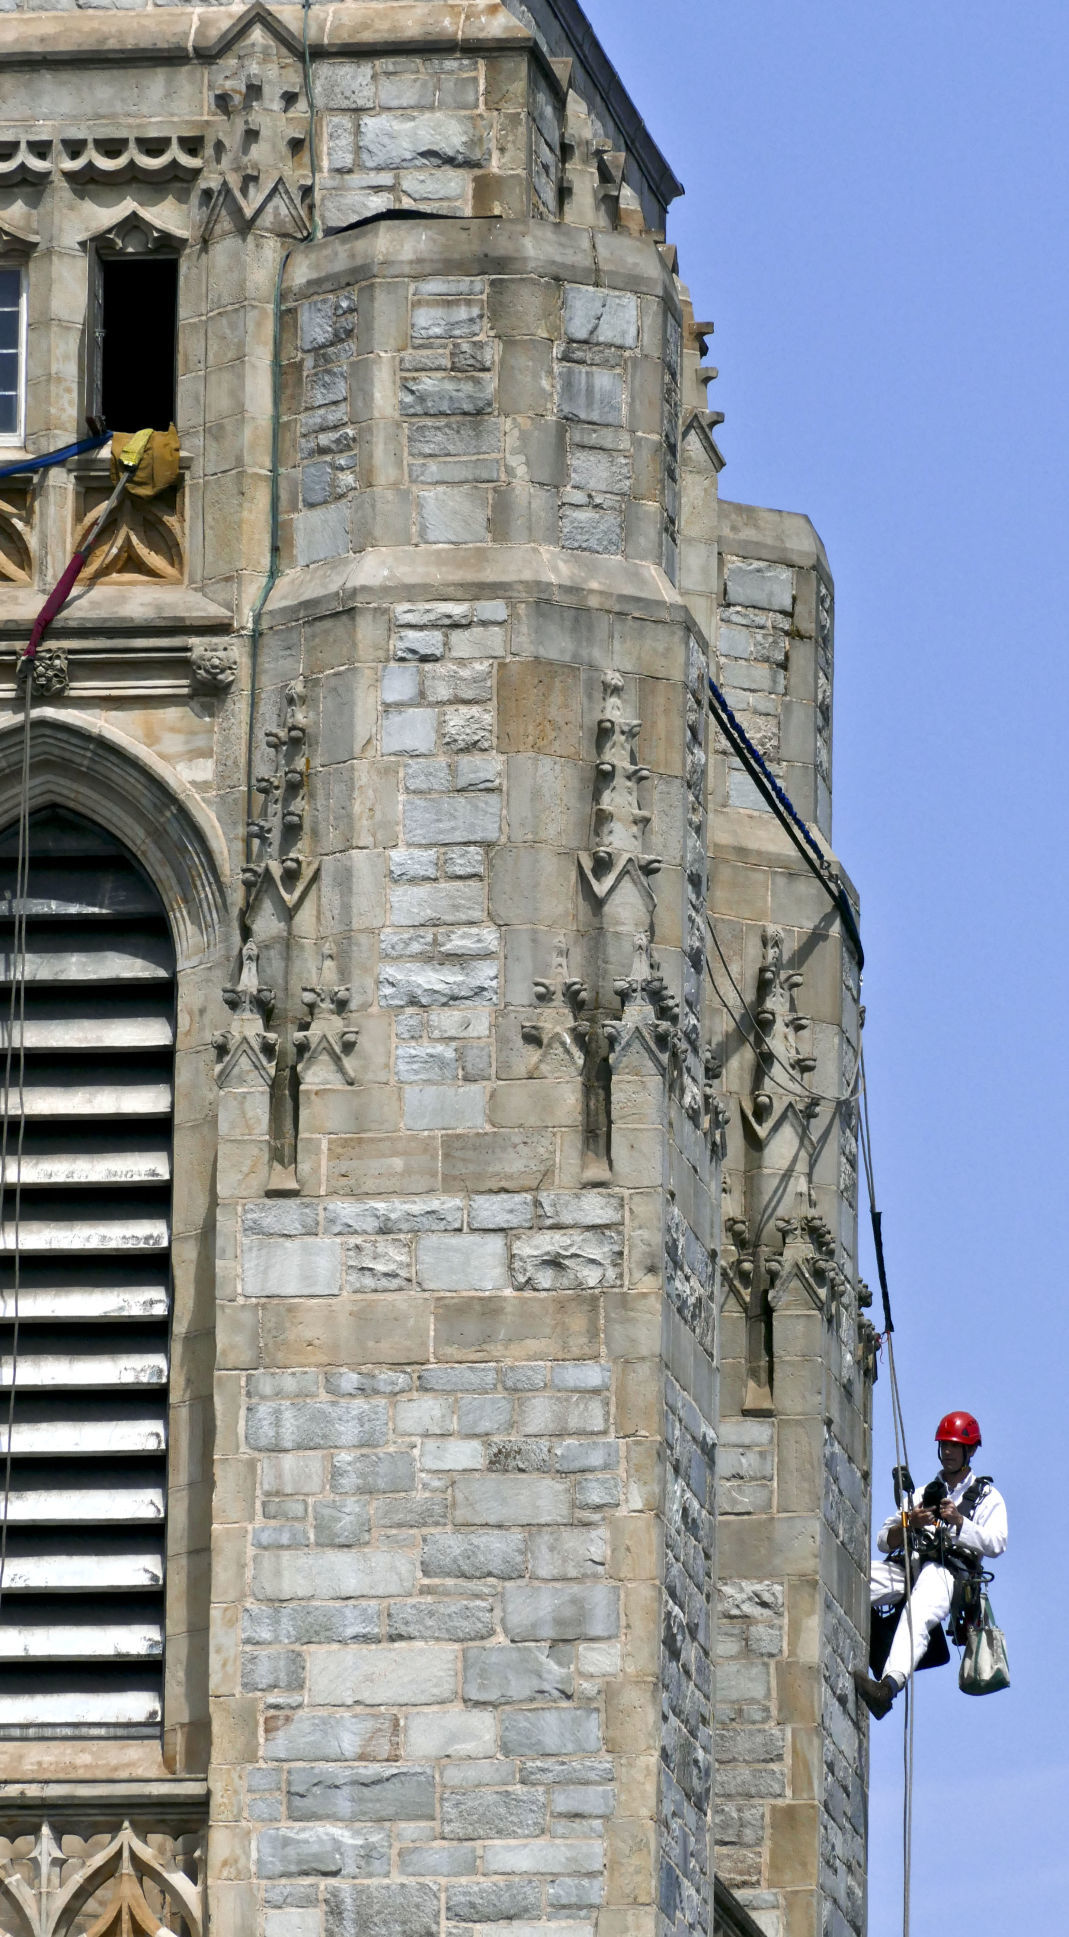 Climbers scale the tower at 90yearold St. Paul's